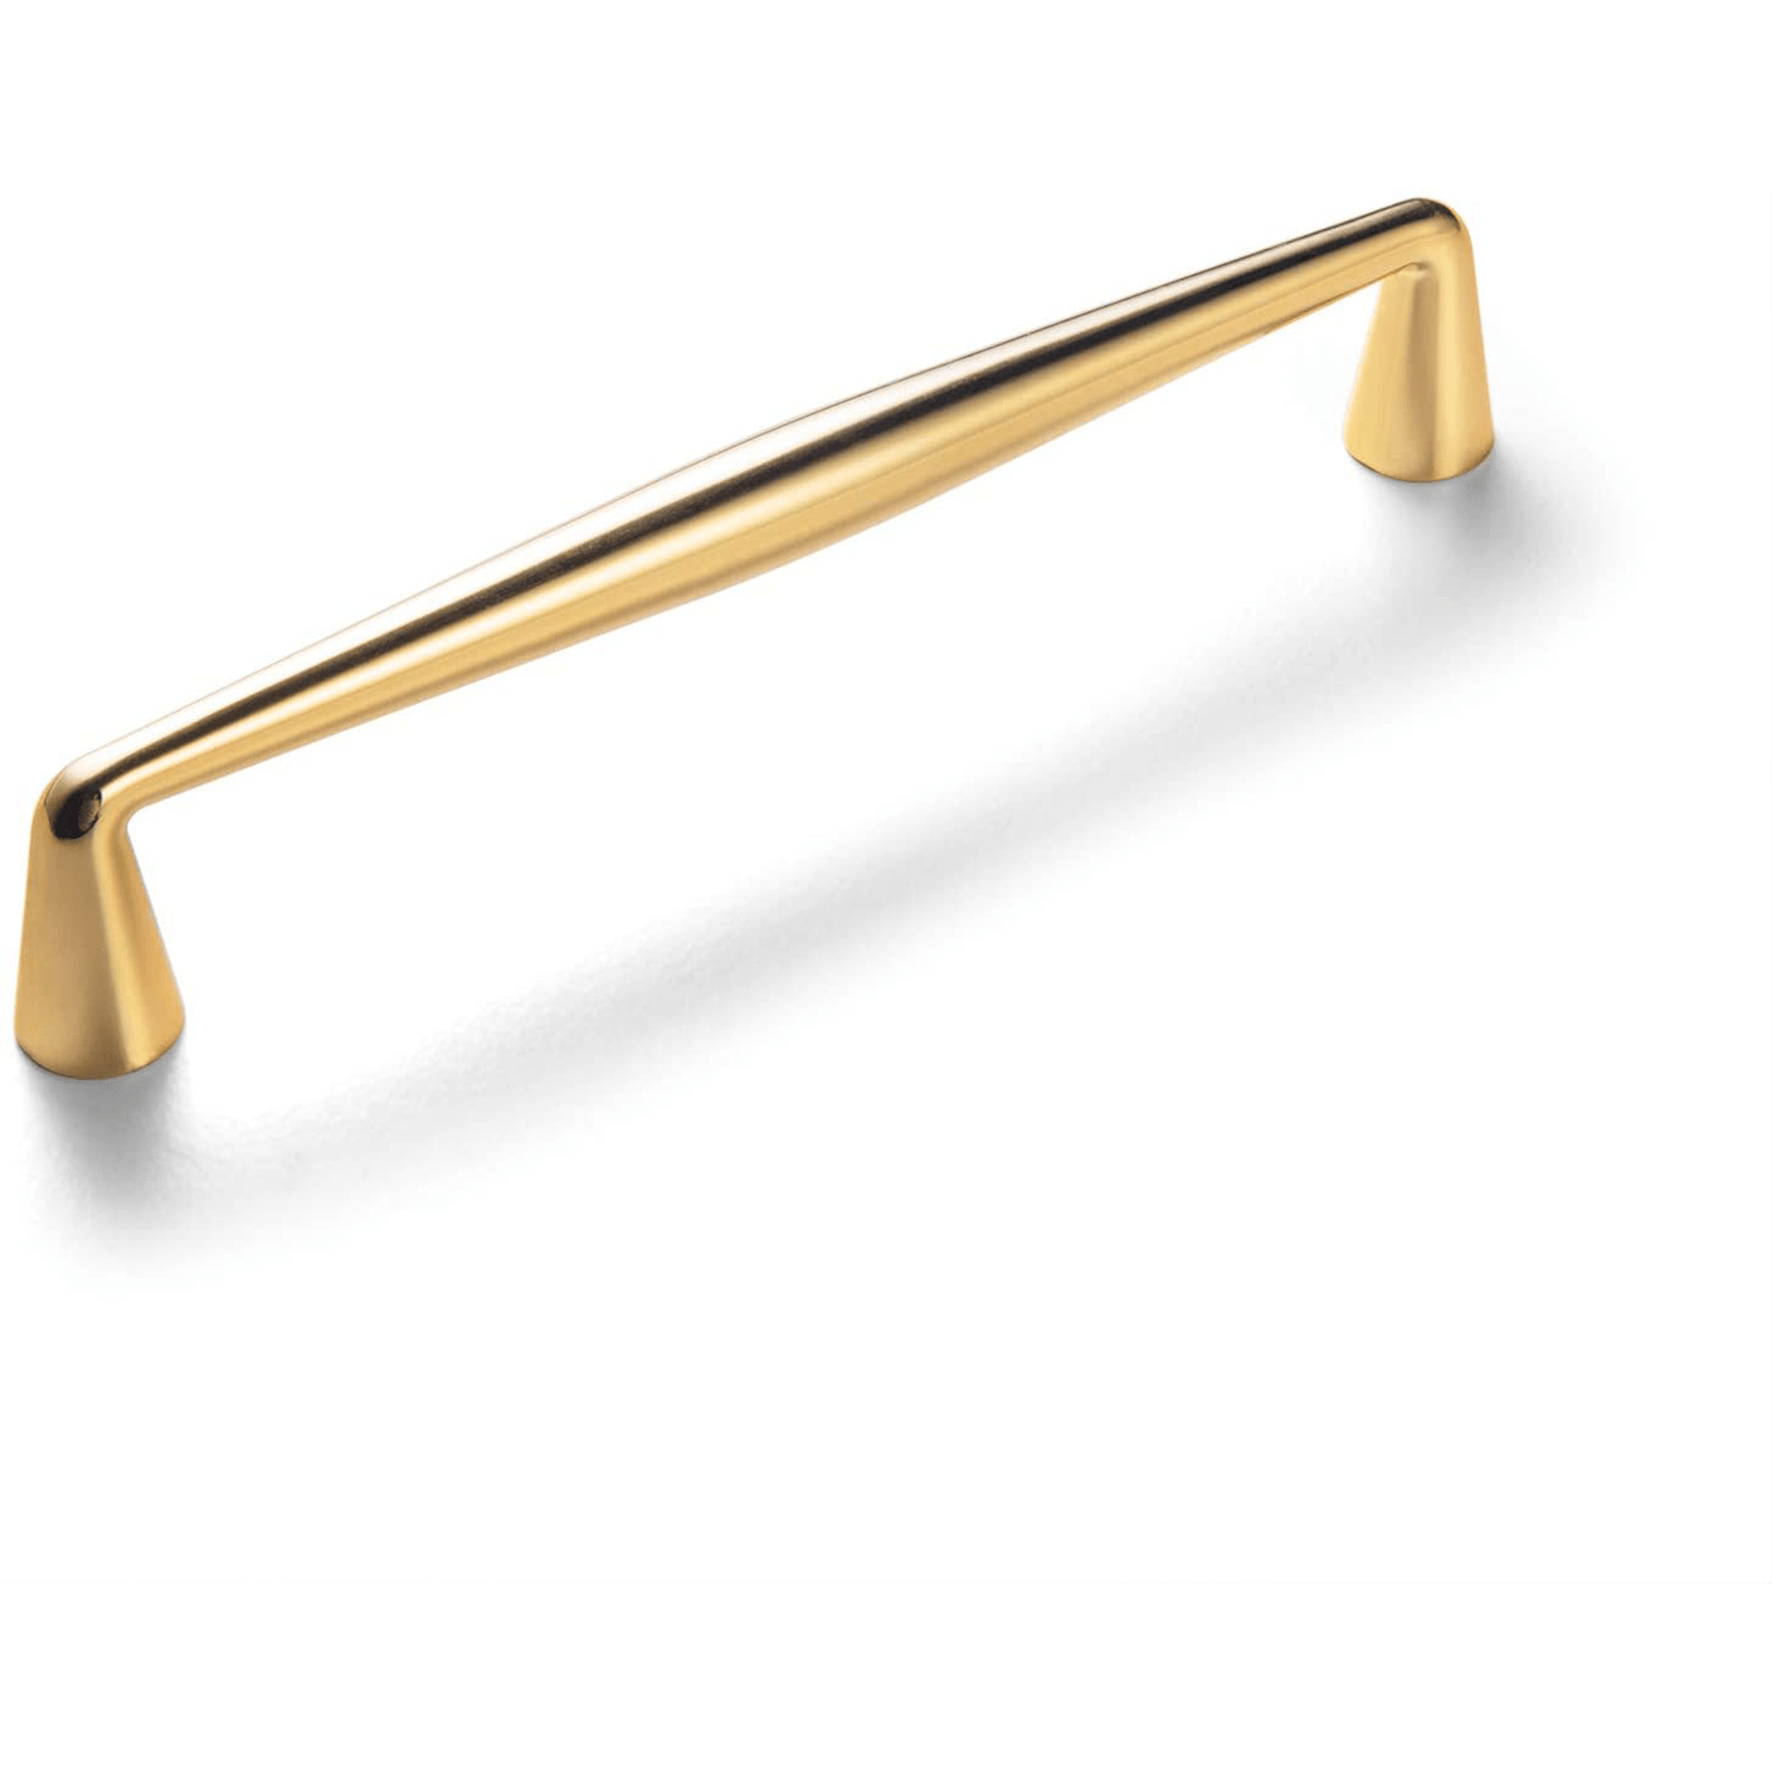 Goo-Ki Polished gold / 3.78'' Hole Center Retro Durable Cabinet Pulls Drawer Knobs for Bedroom Kitchen 6 Pack